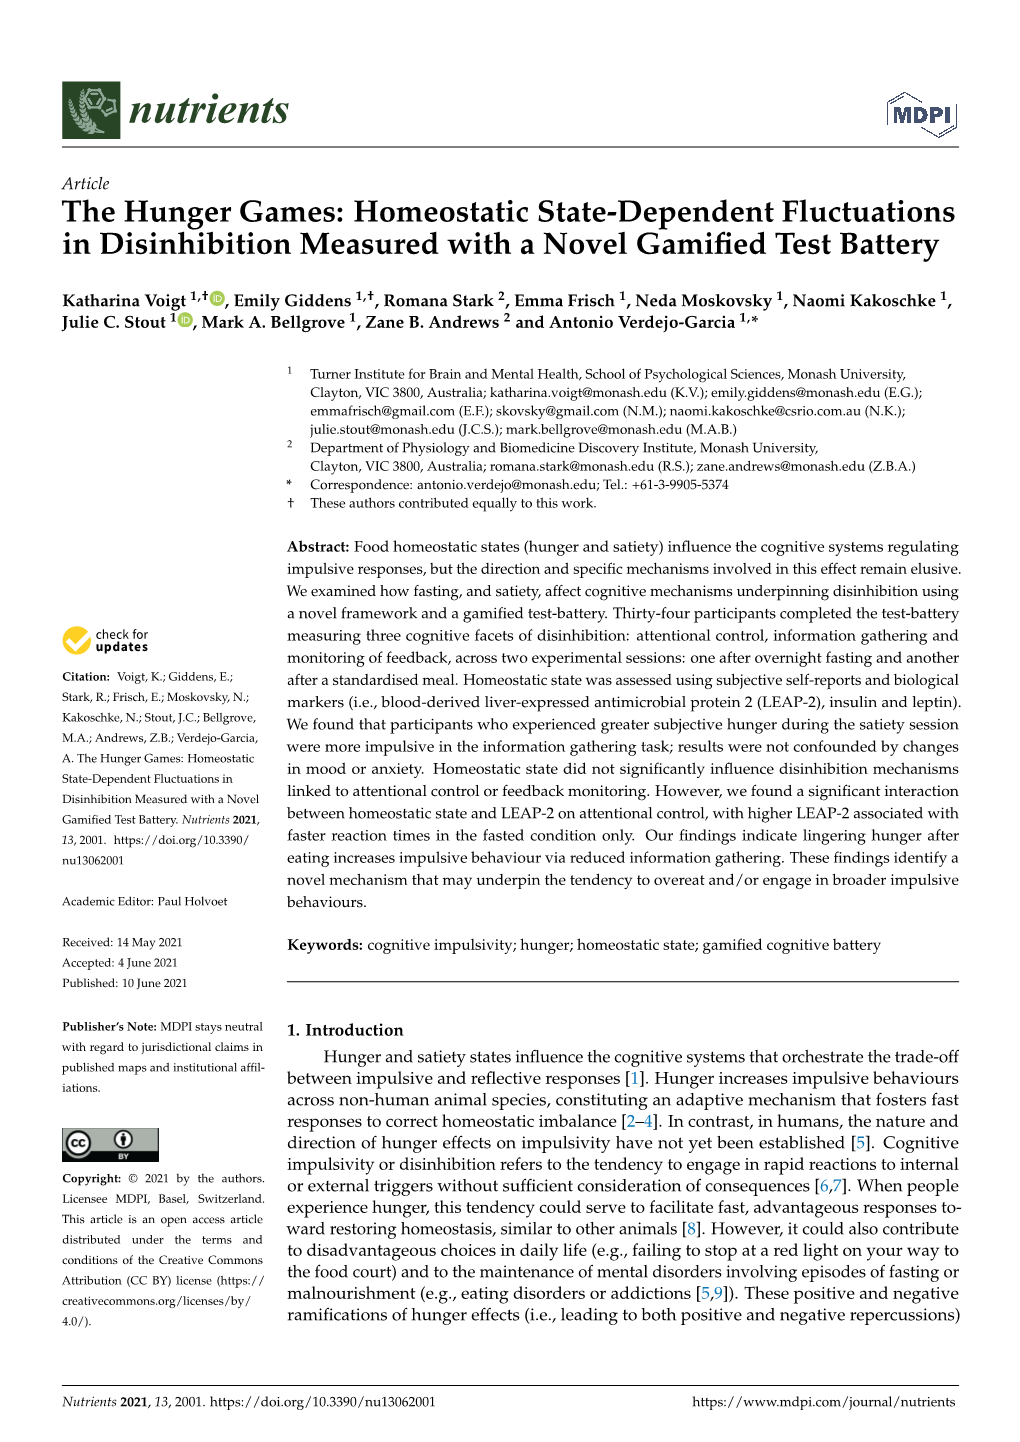 The Hunger Games: Homeostatic State-Dependent Fluctuations in Disinhibition Measured with a Novel Gamiﬁed Test Battery